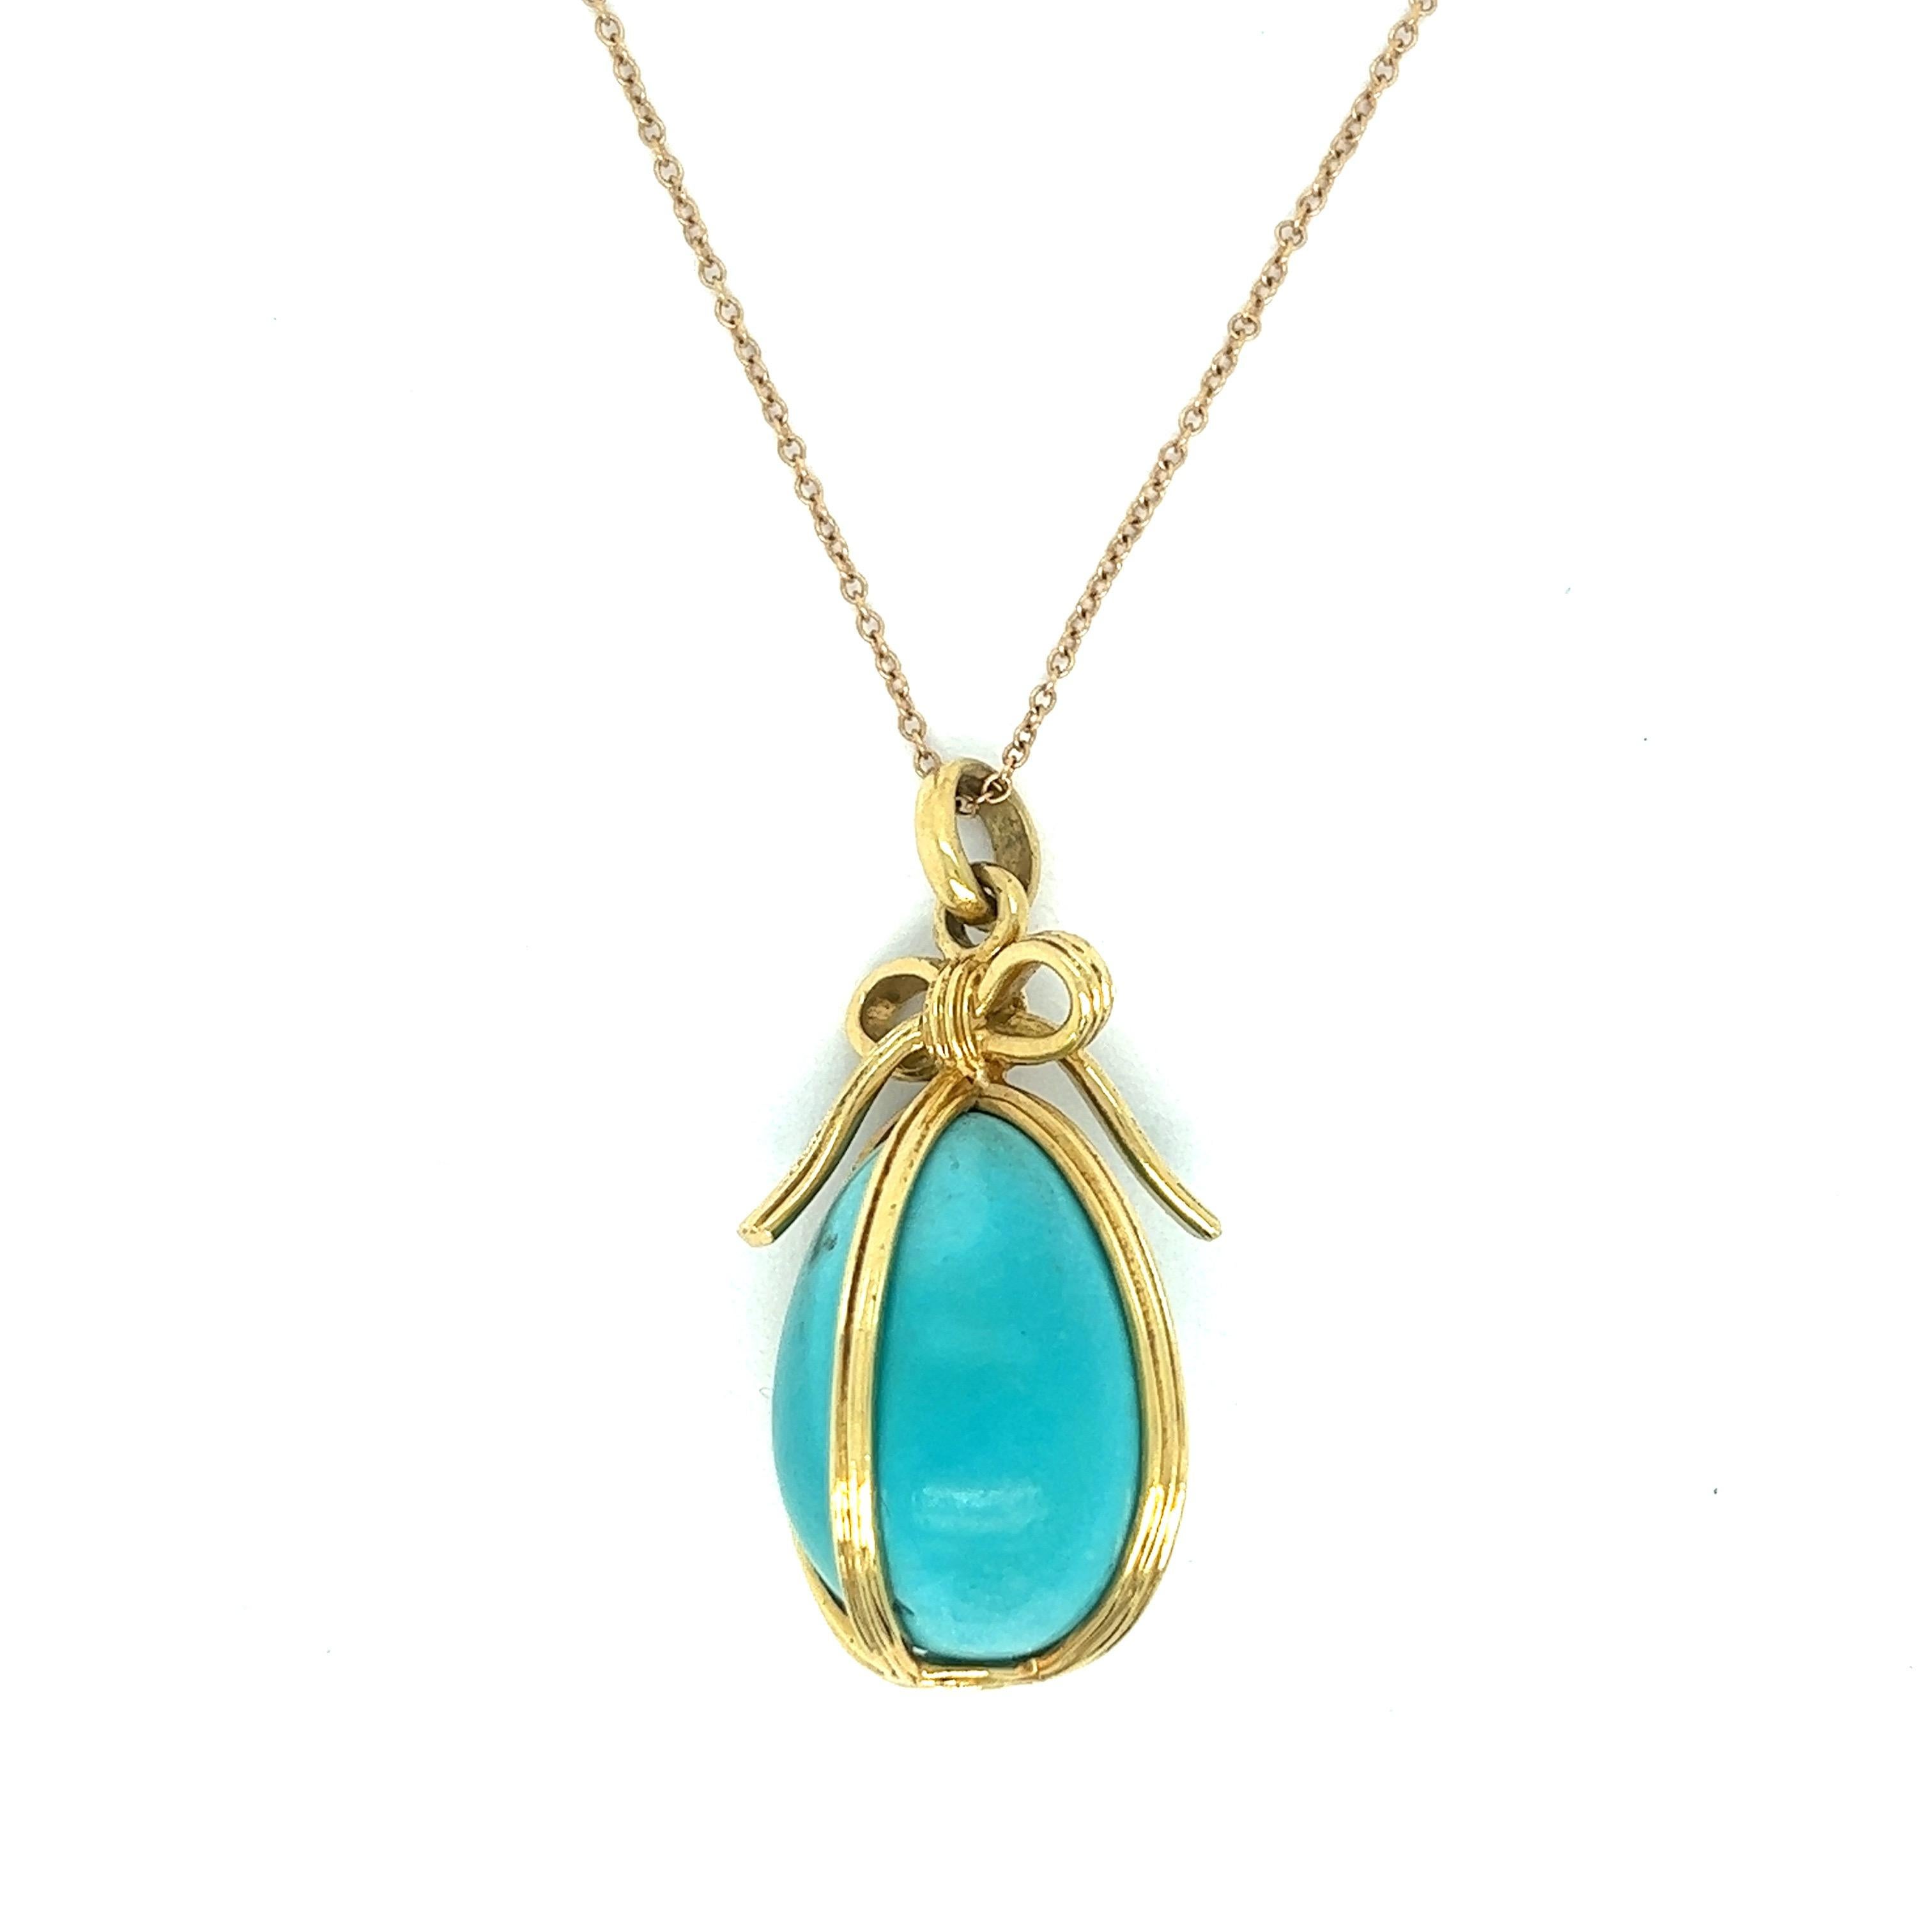 Contemporary Schlumberger for Tiffany & Co. Turquoise Egg Pendant Necklace